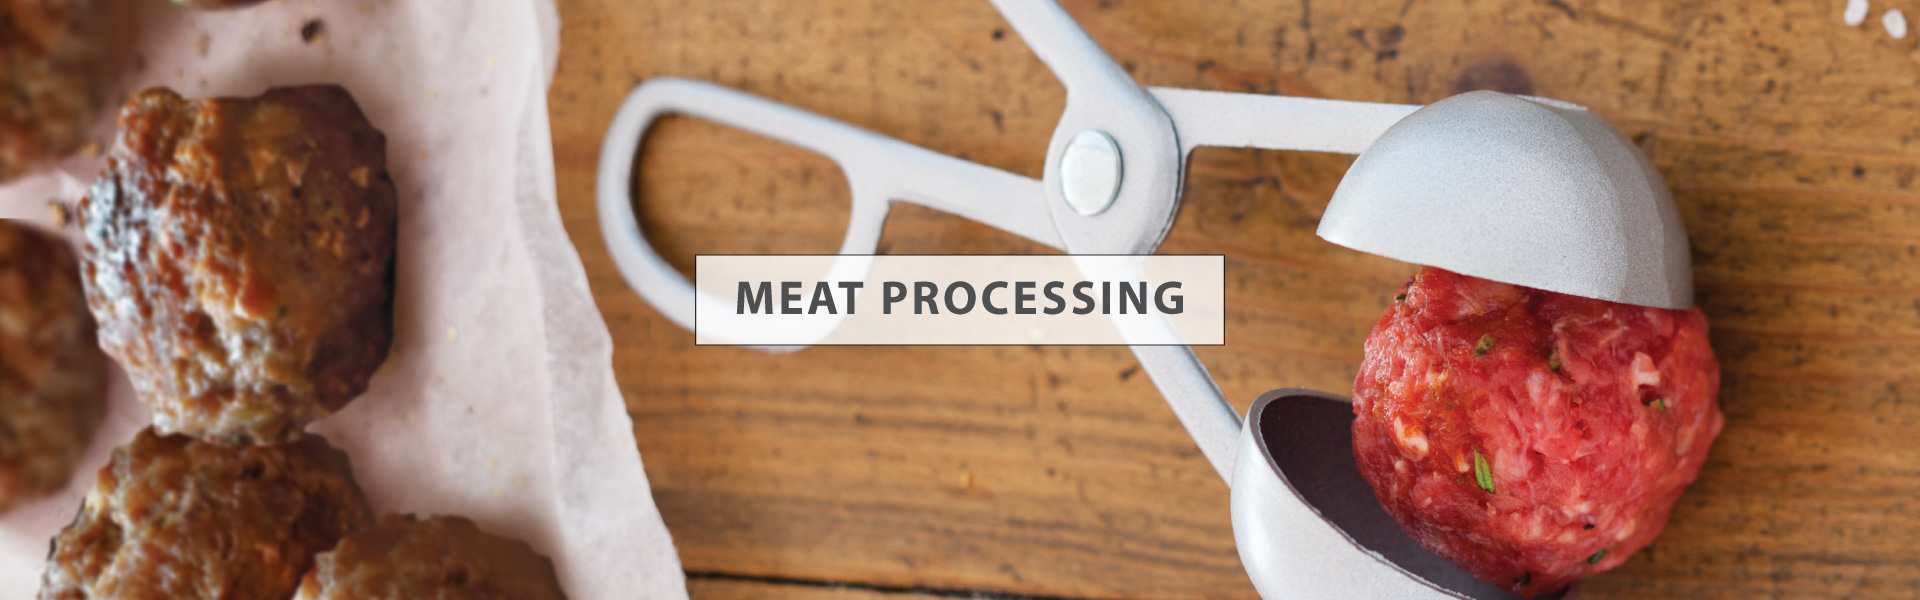 MEAT PROCESSING